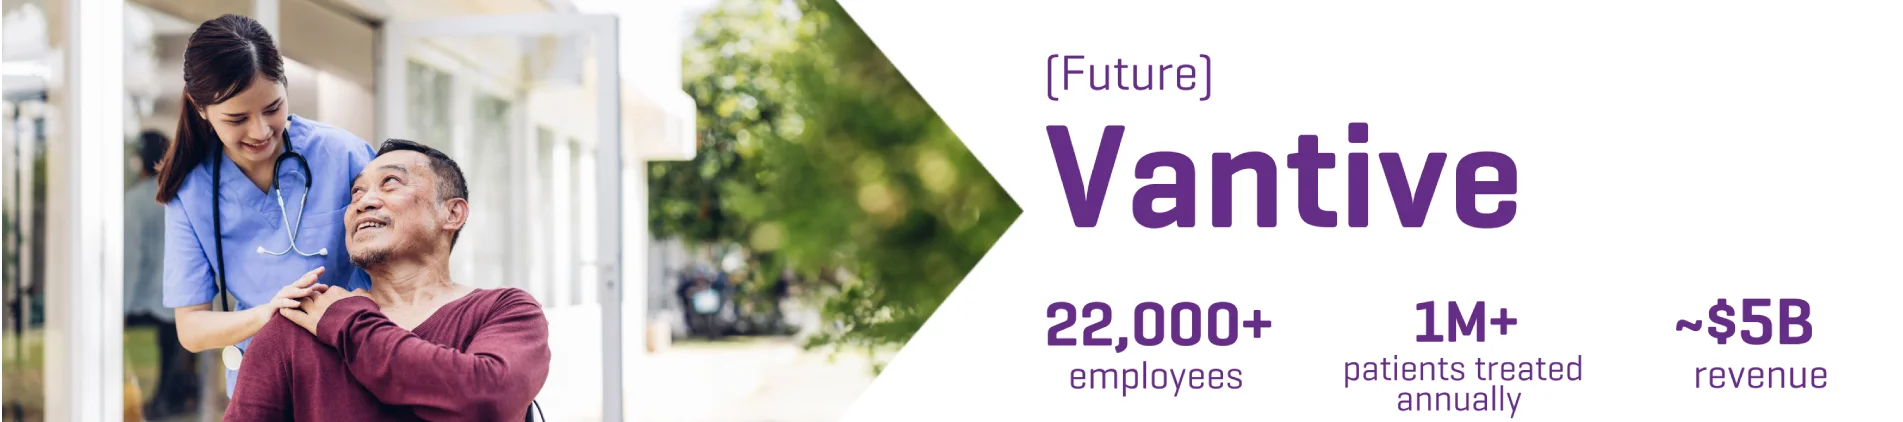 Future Vantive will have 22,000+ employees, 1 million+ patients served and approximately 5 billion in revenue